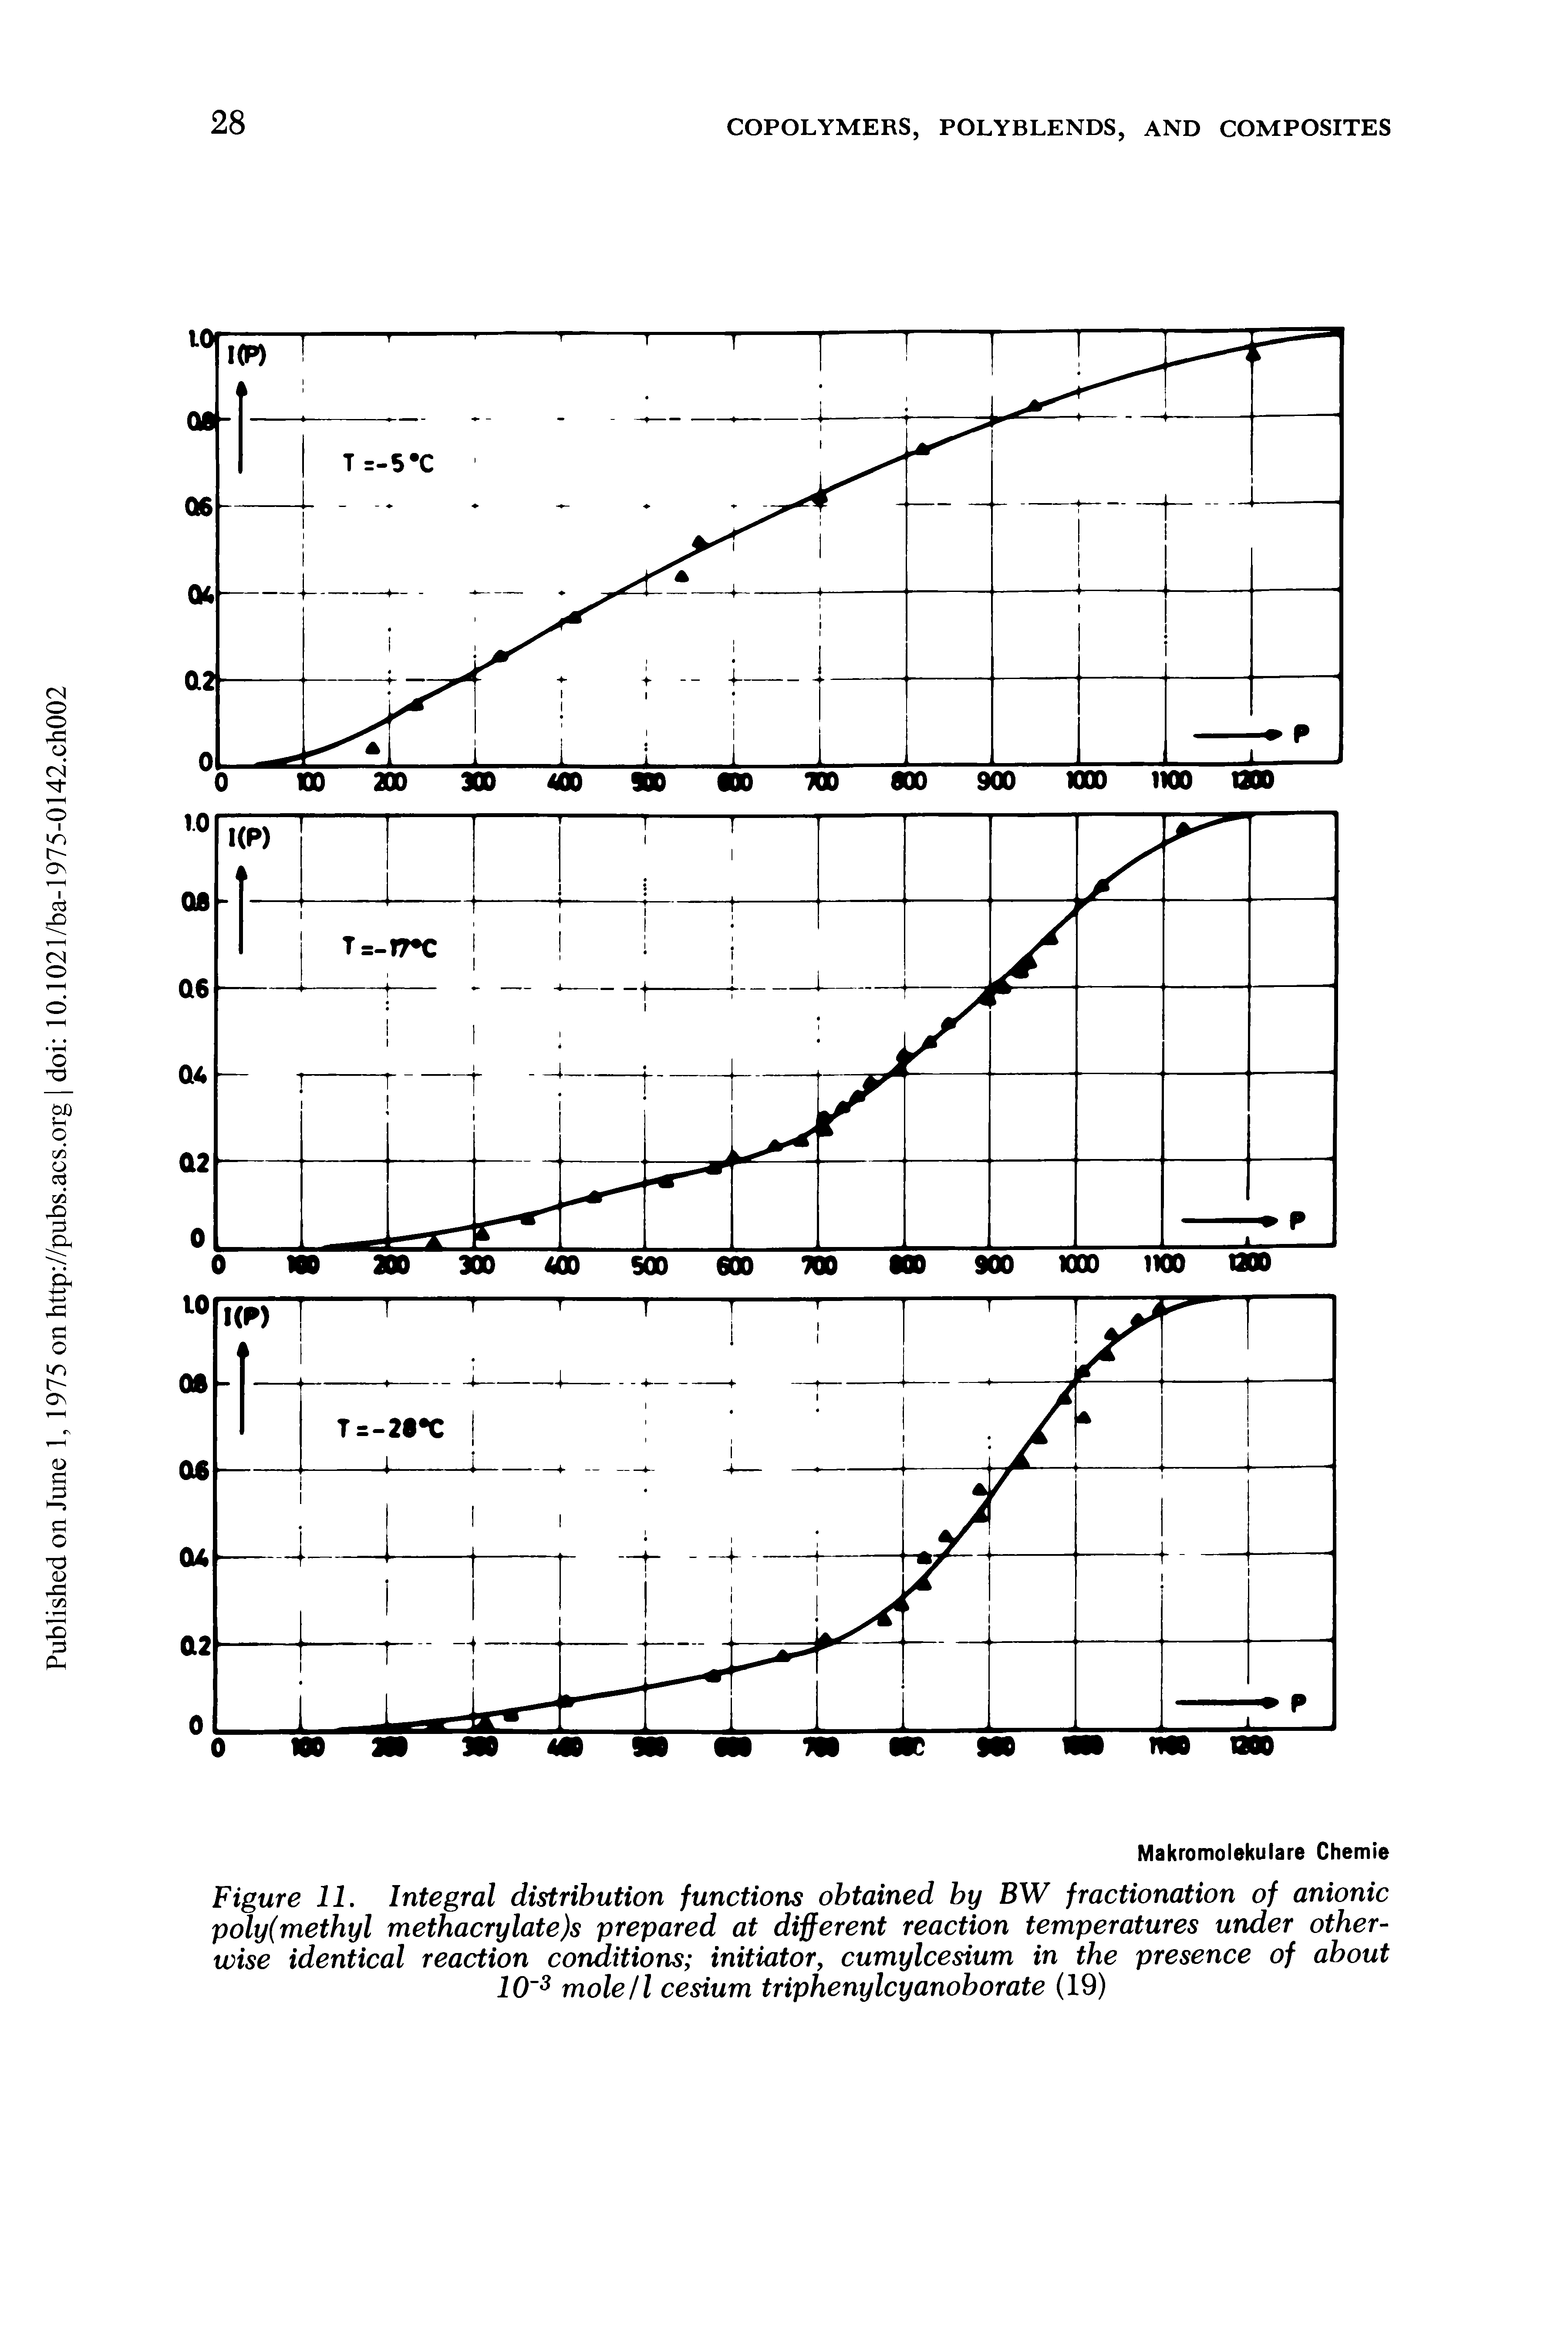 Figure 11. Integral distribution functions obtained by BW fractionation of anionic poly(methyl methacrylate)s prepared at different reaction temperatures under otherwise identical reaction conditions initiator, cumylcesium in the presence of about 10 3 mole/1 cesium triphenylcyanoborate (19)...